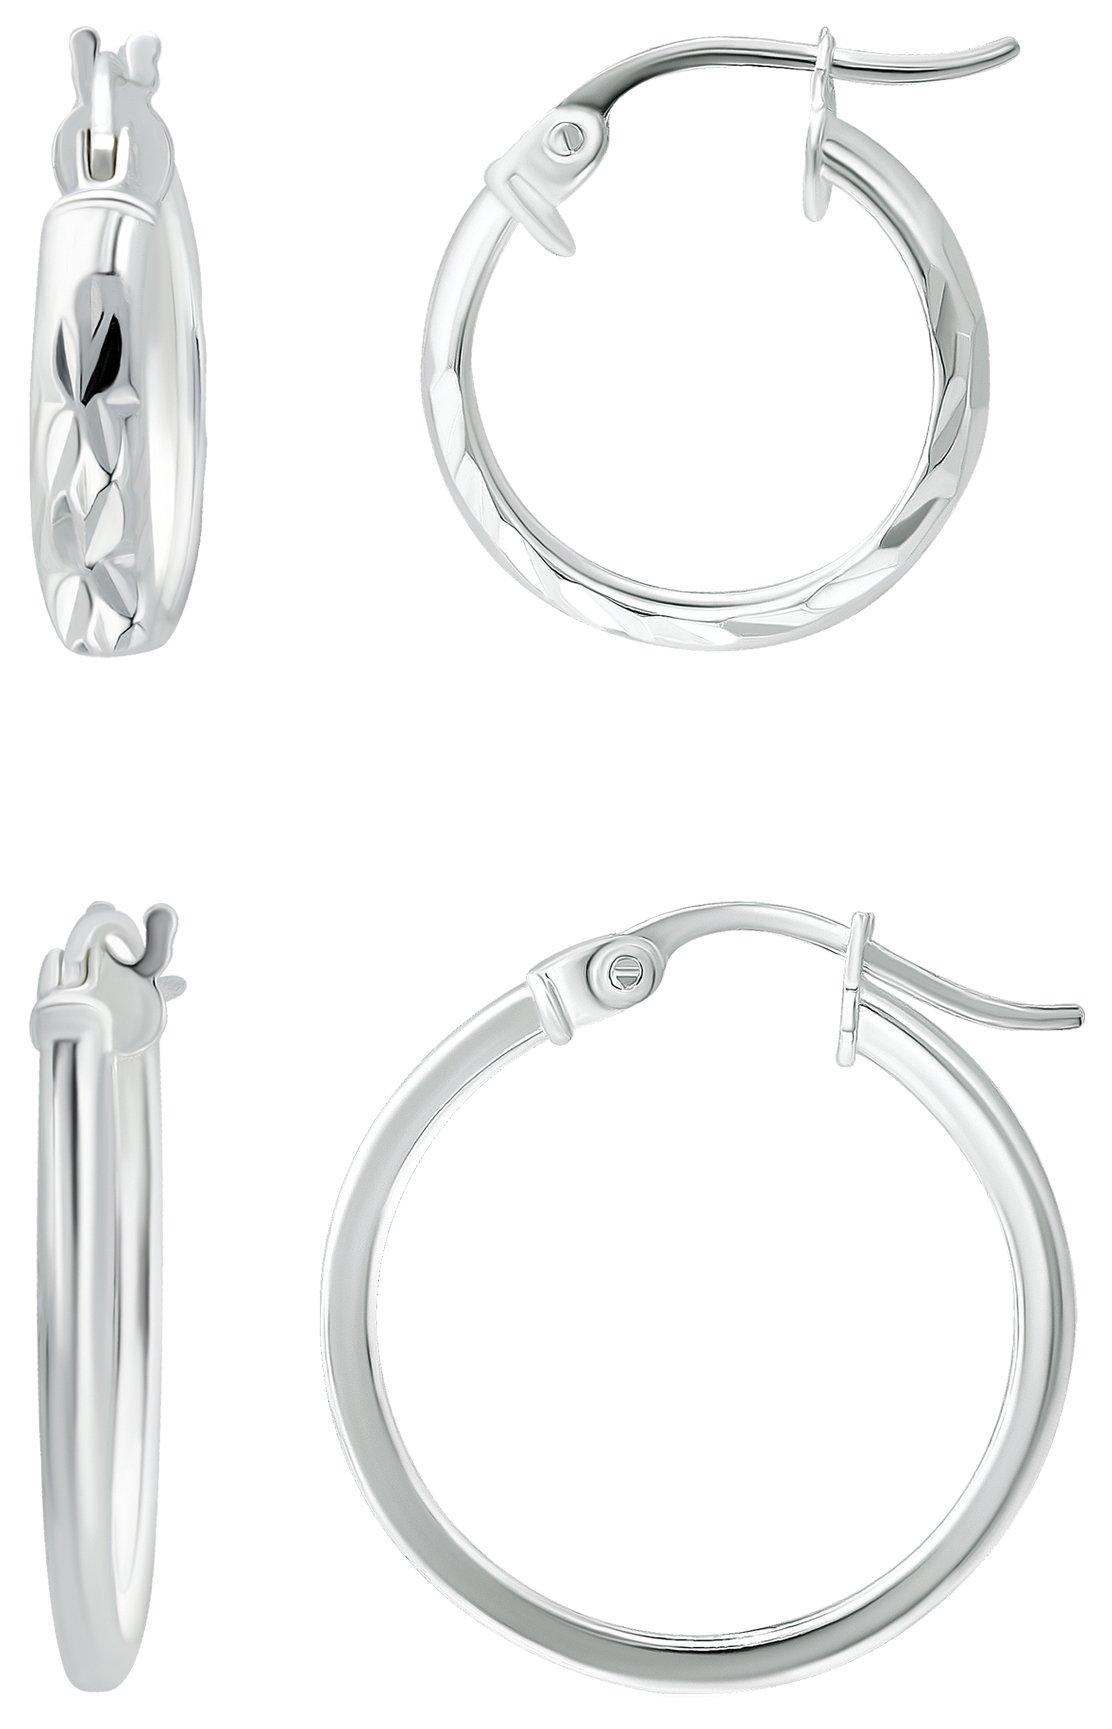 Piper & Taylor 2-Pc. Silver Tone Hoops Earring Set